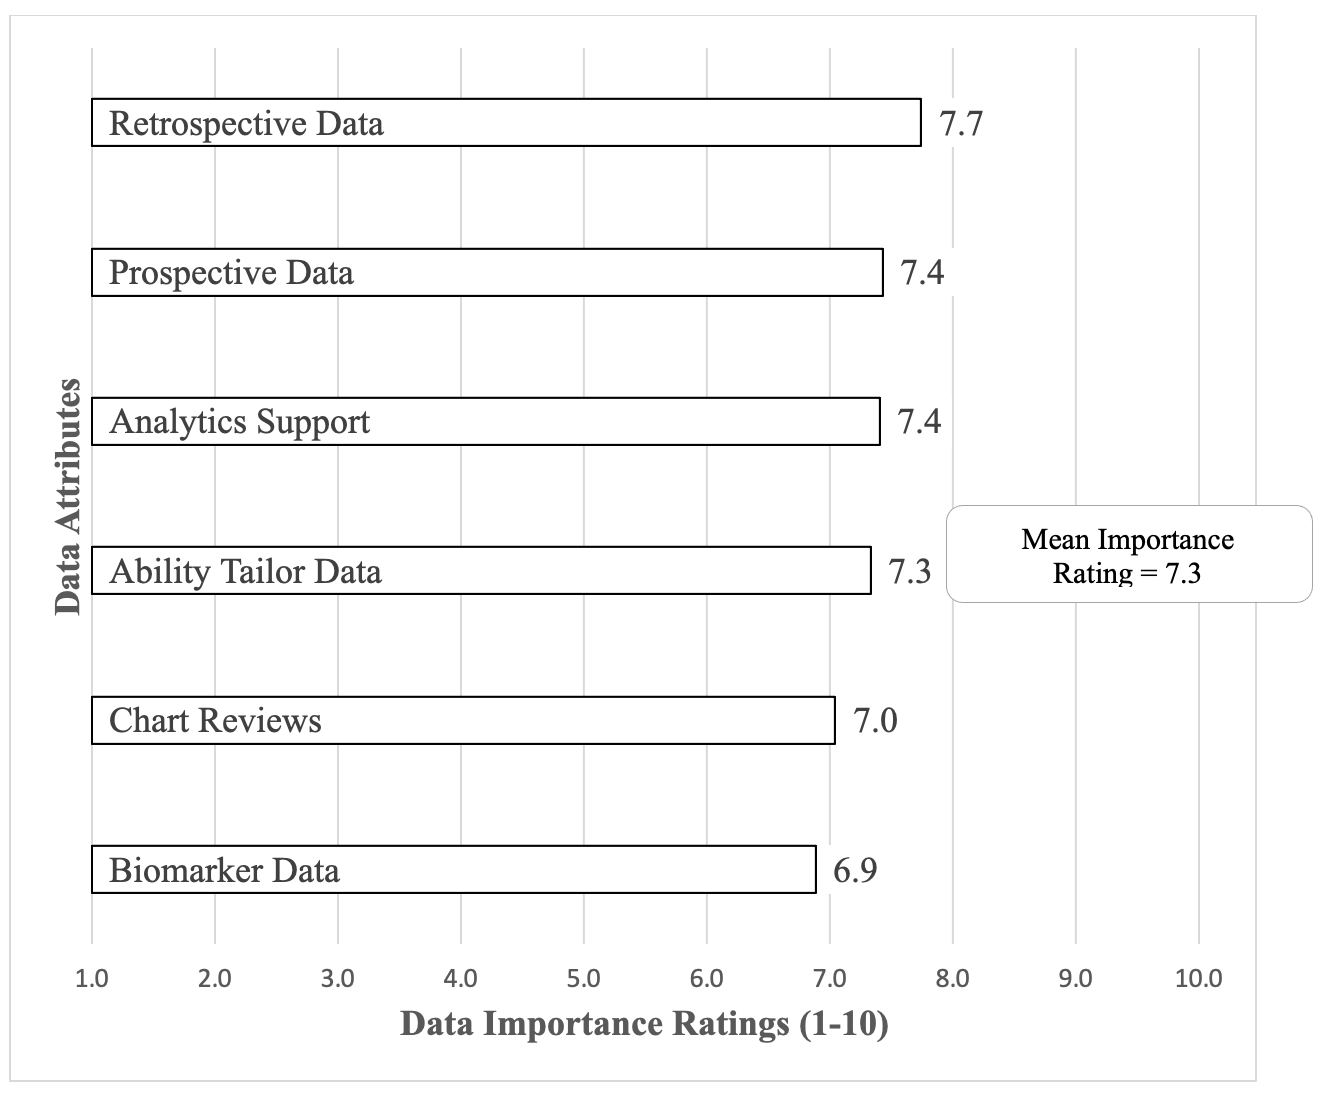 Figure 1. Importance of Data Attributes with Real-World Data